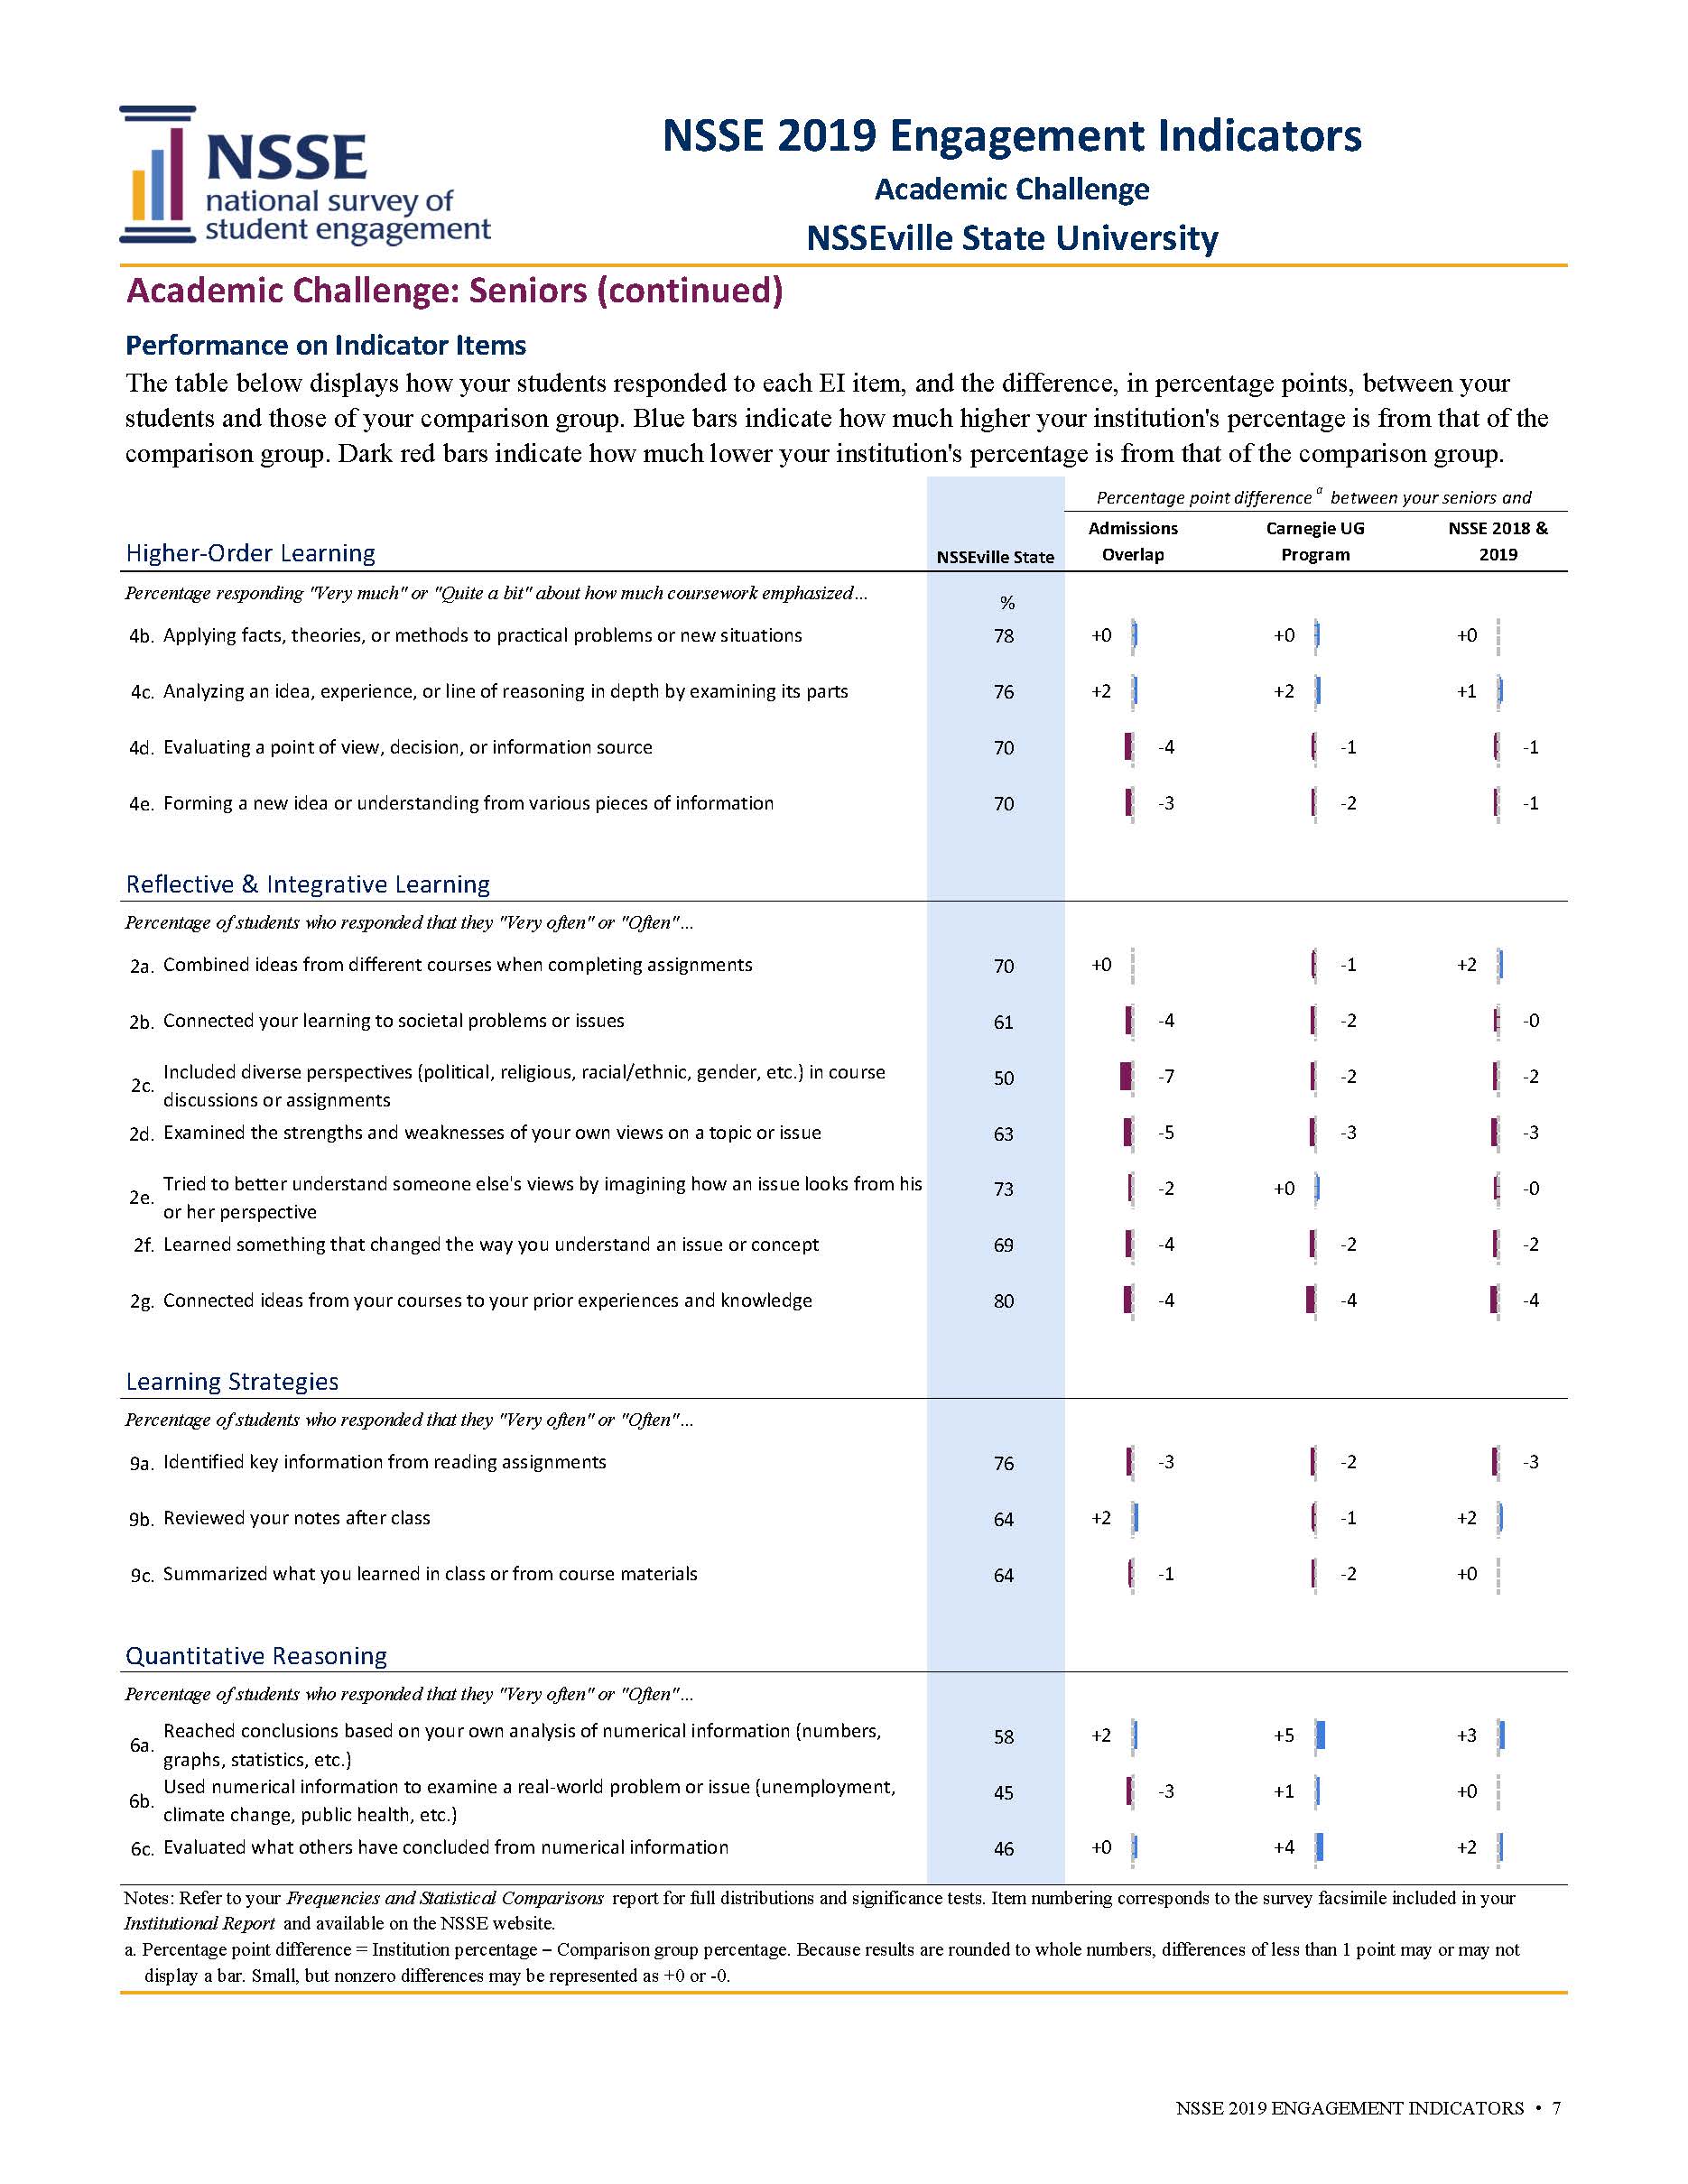 Sample Report: page 7 of NSSE Engagement Indicators